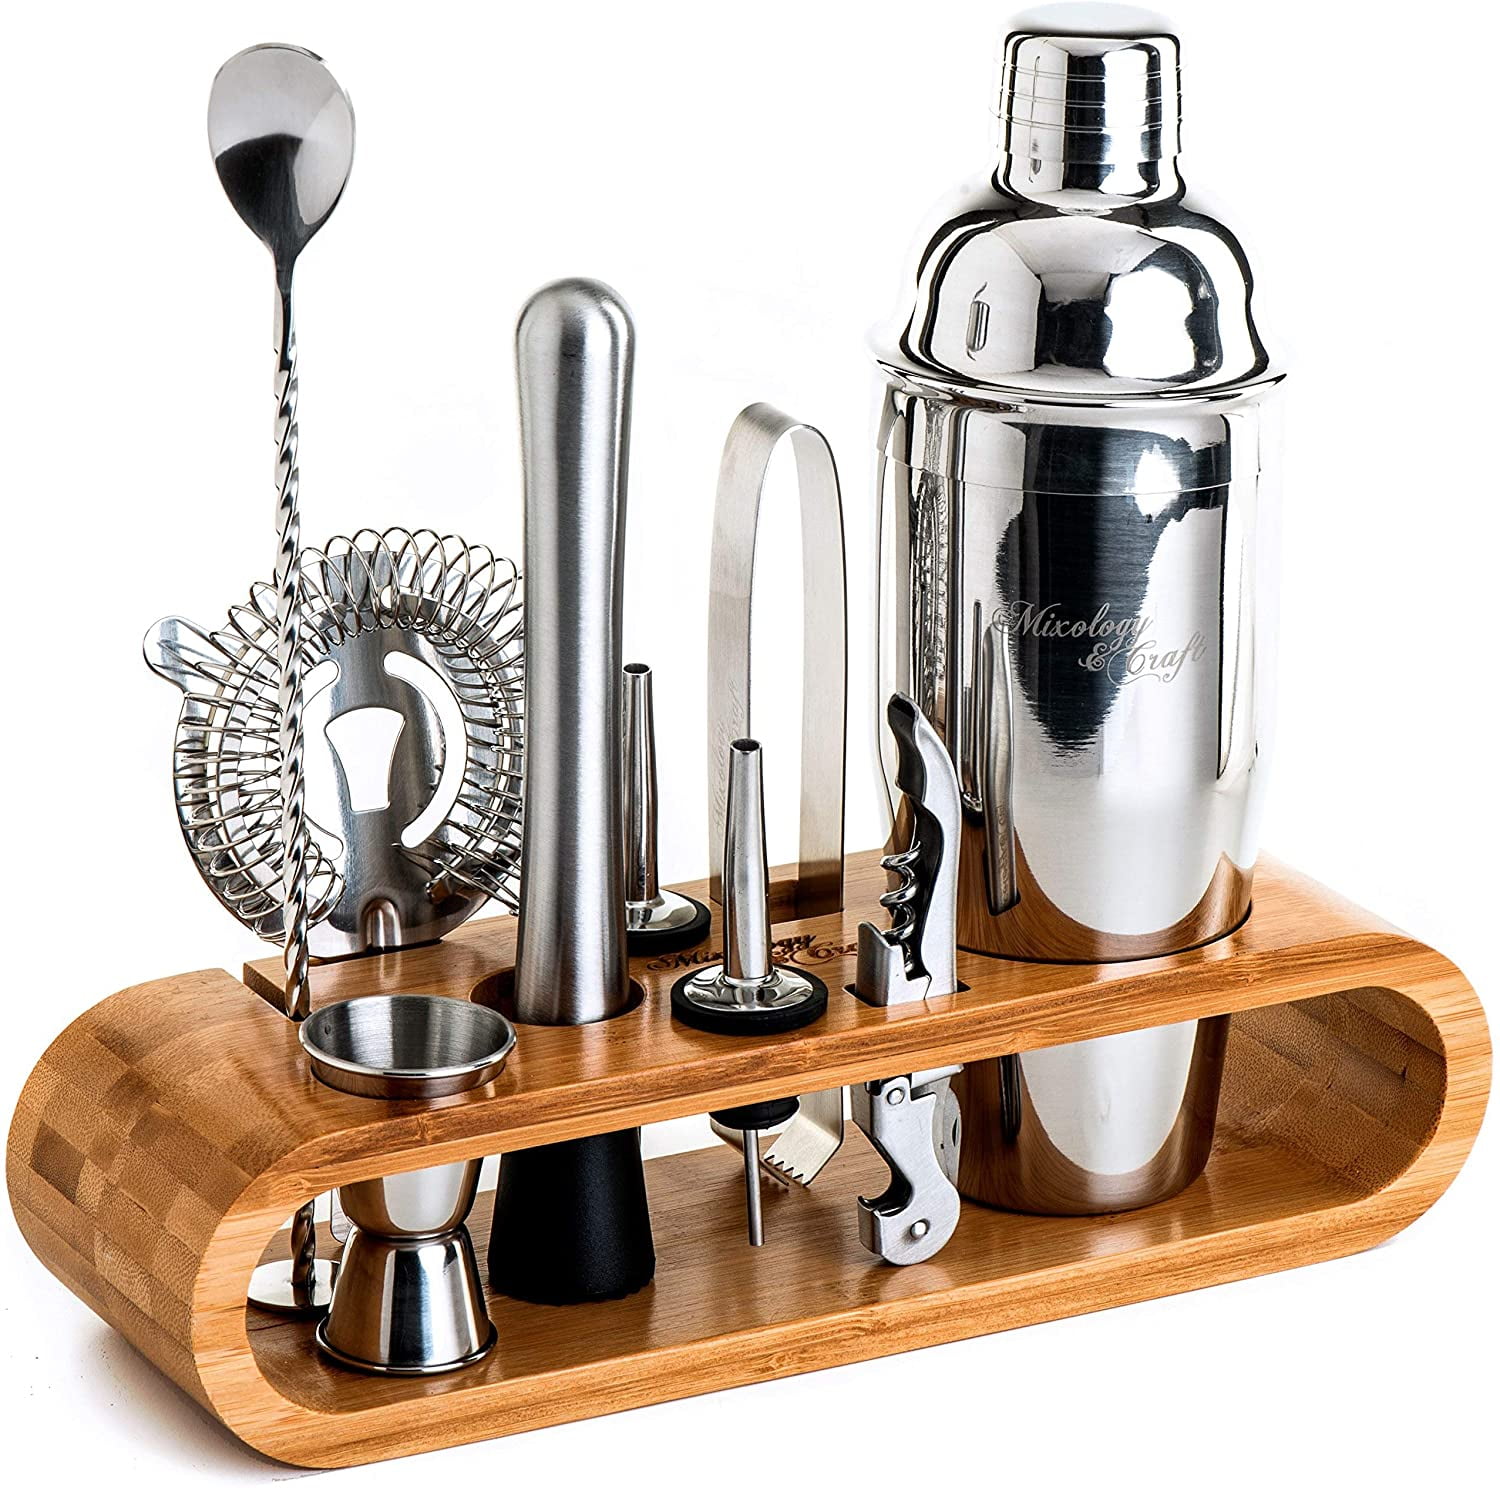 Soing 11-Piece Silver Bartender Kit,Perfect Home Cocktail Shaker Set for Drink Mixing,Stainless Steel Bar Tools with Stand,Velvet Carry Bag & Cocktail Recipes Cards Silver